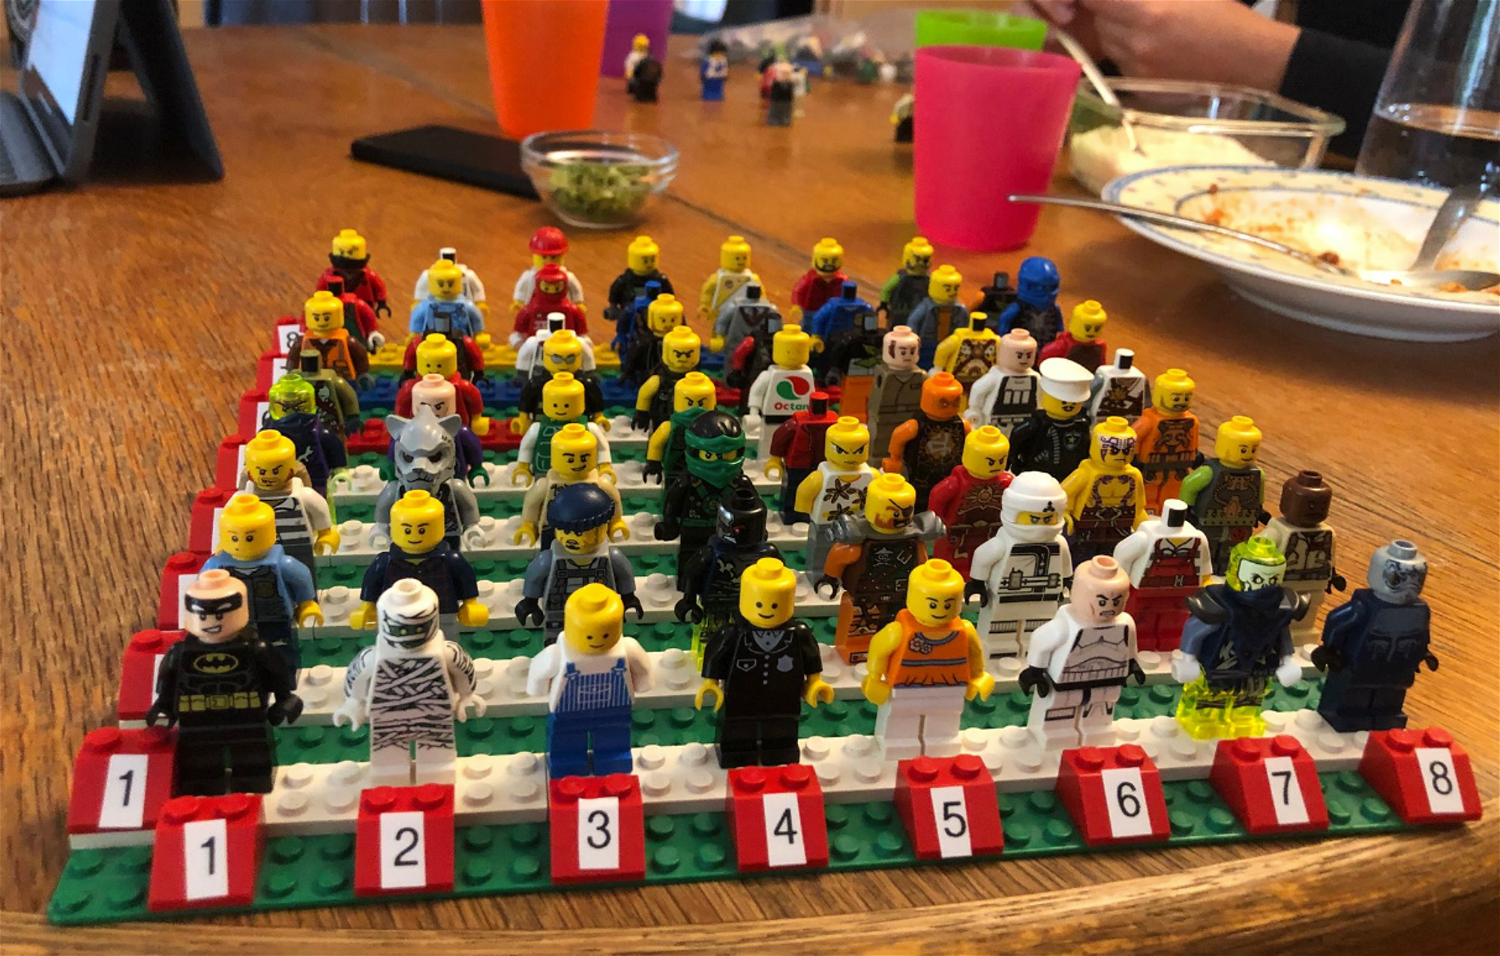 Aug 18, 2021
I started with just identifying Minifigures. My entire family helped to sort, take training images and beta test. Special thanks to my Mom, my siblings and my girlfriend at that time 🙏❤️